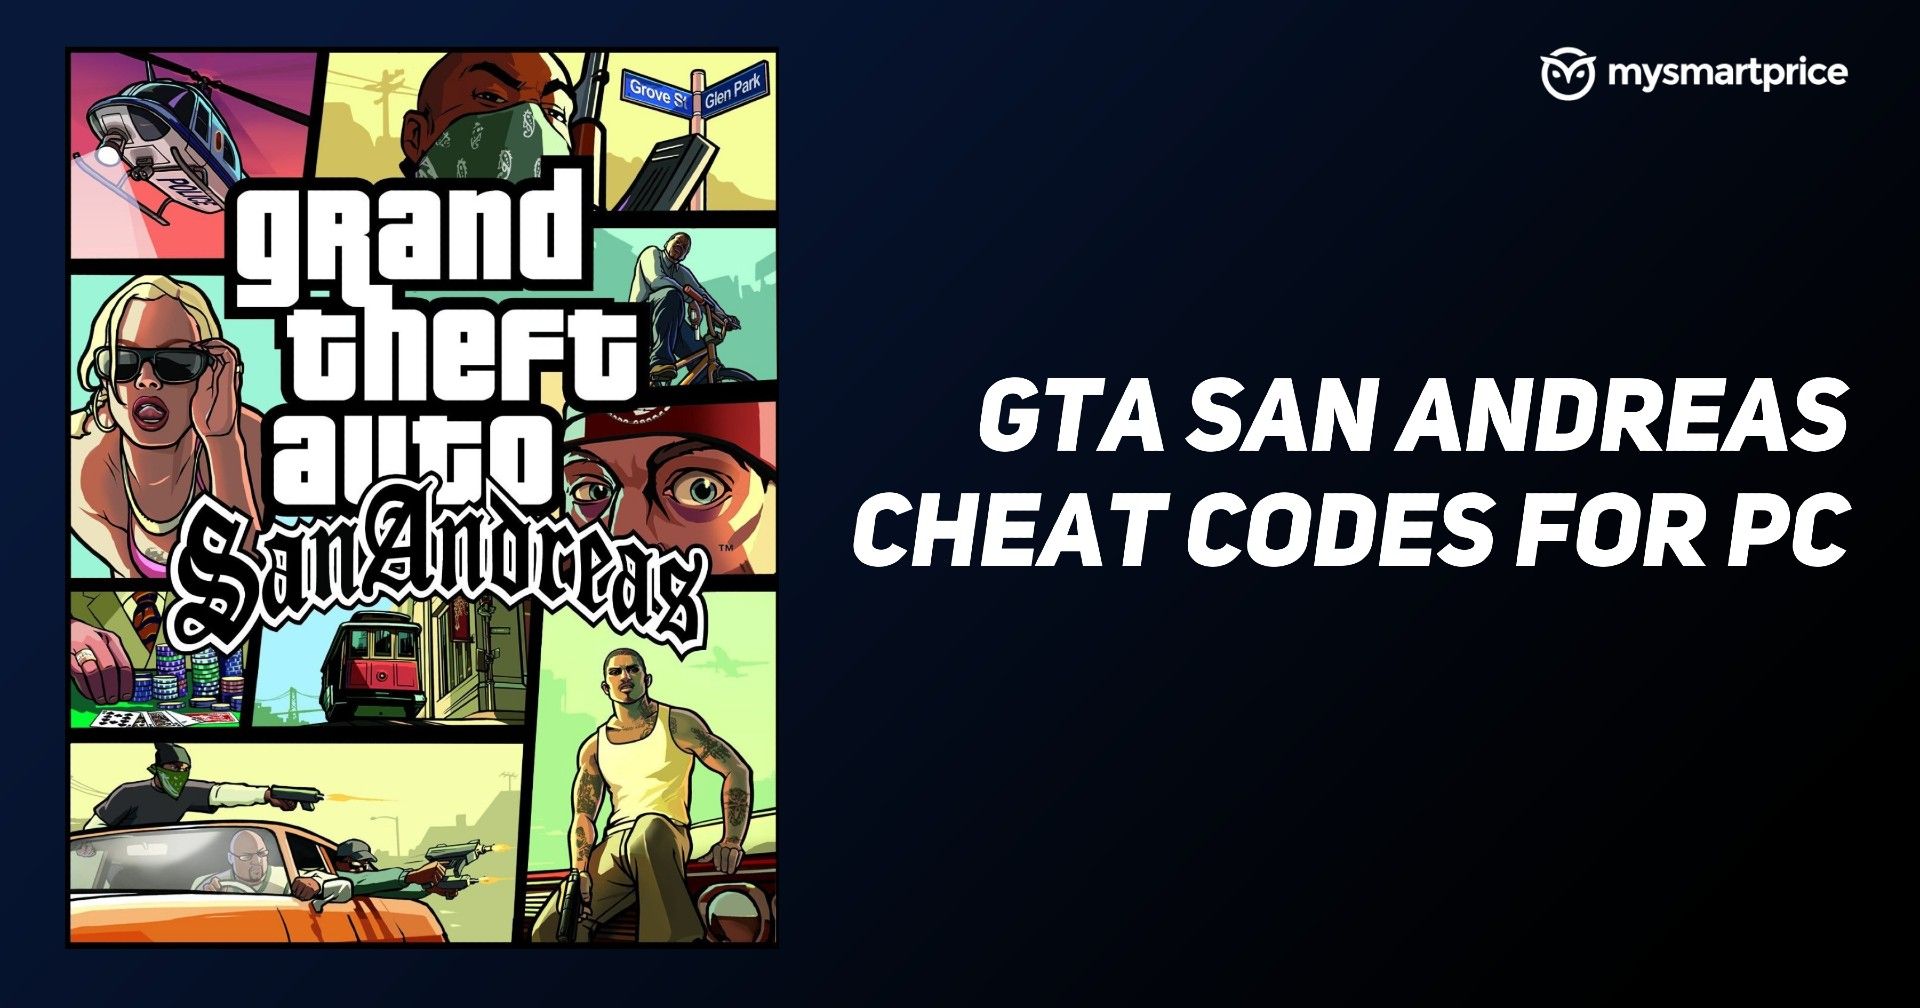 Gta san andreas cheats download for pc ms project download free